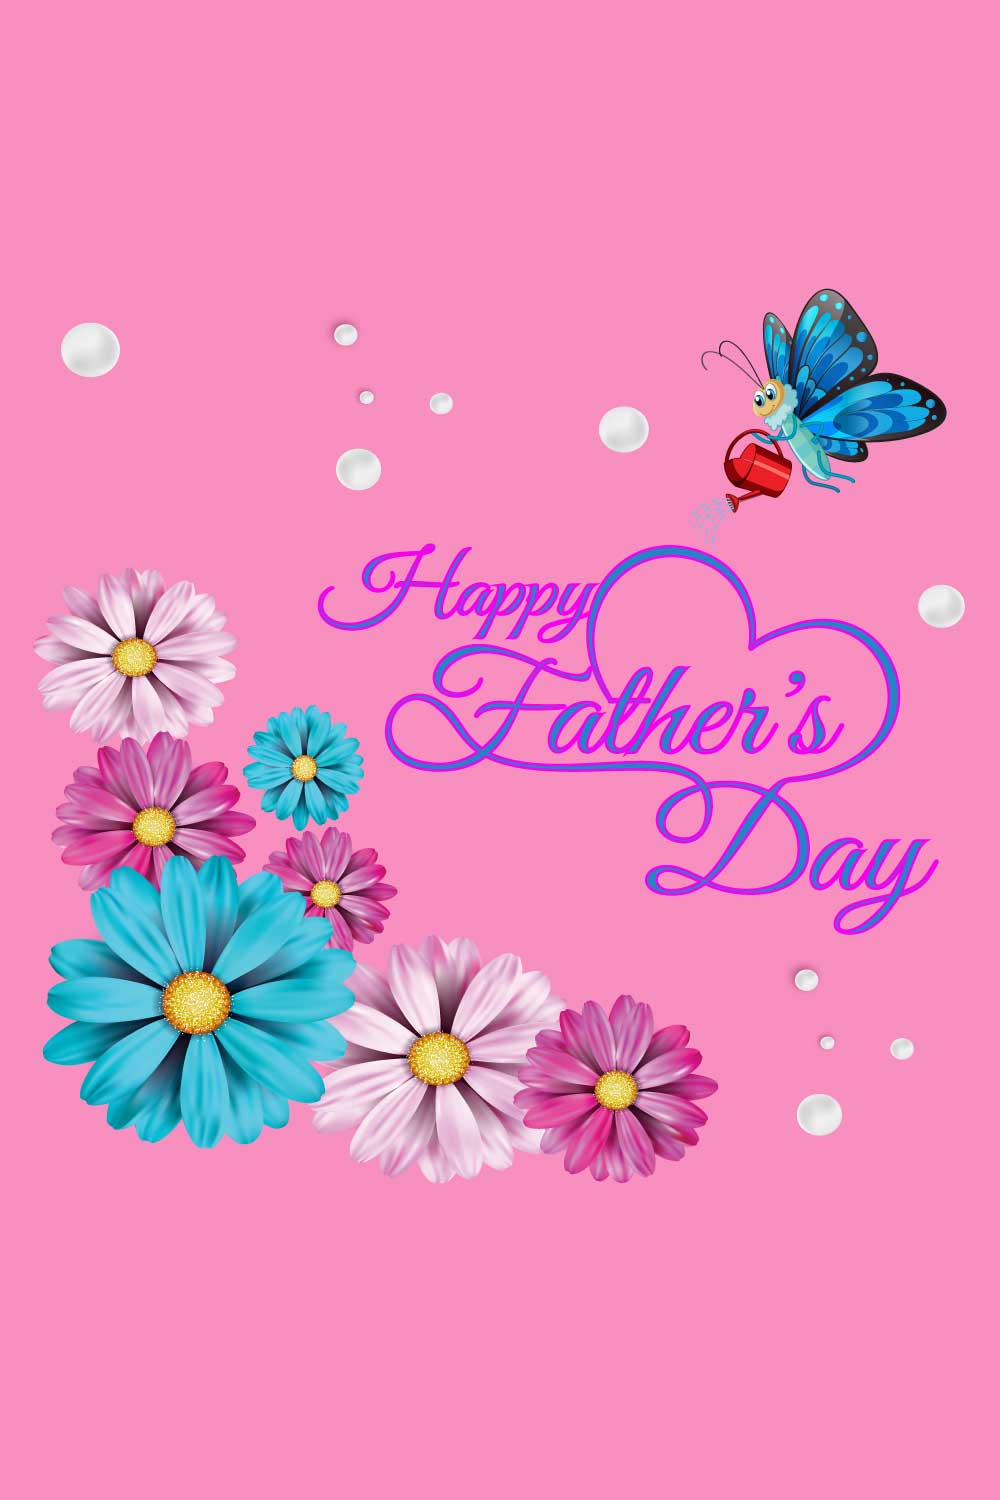 HAPPY FATHER'S DAY 2023 ,,floral greeting card with butterfly pinterest preview image.